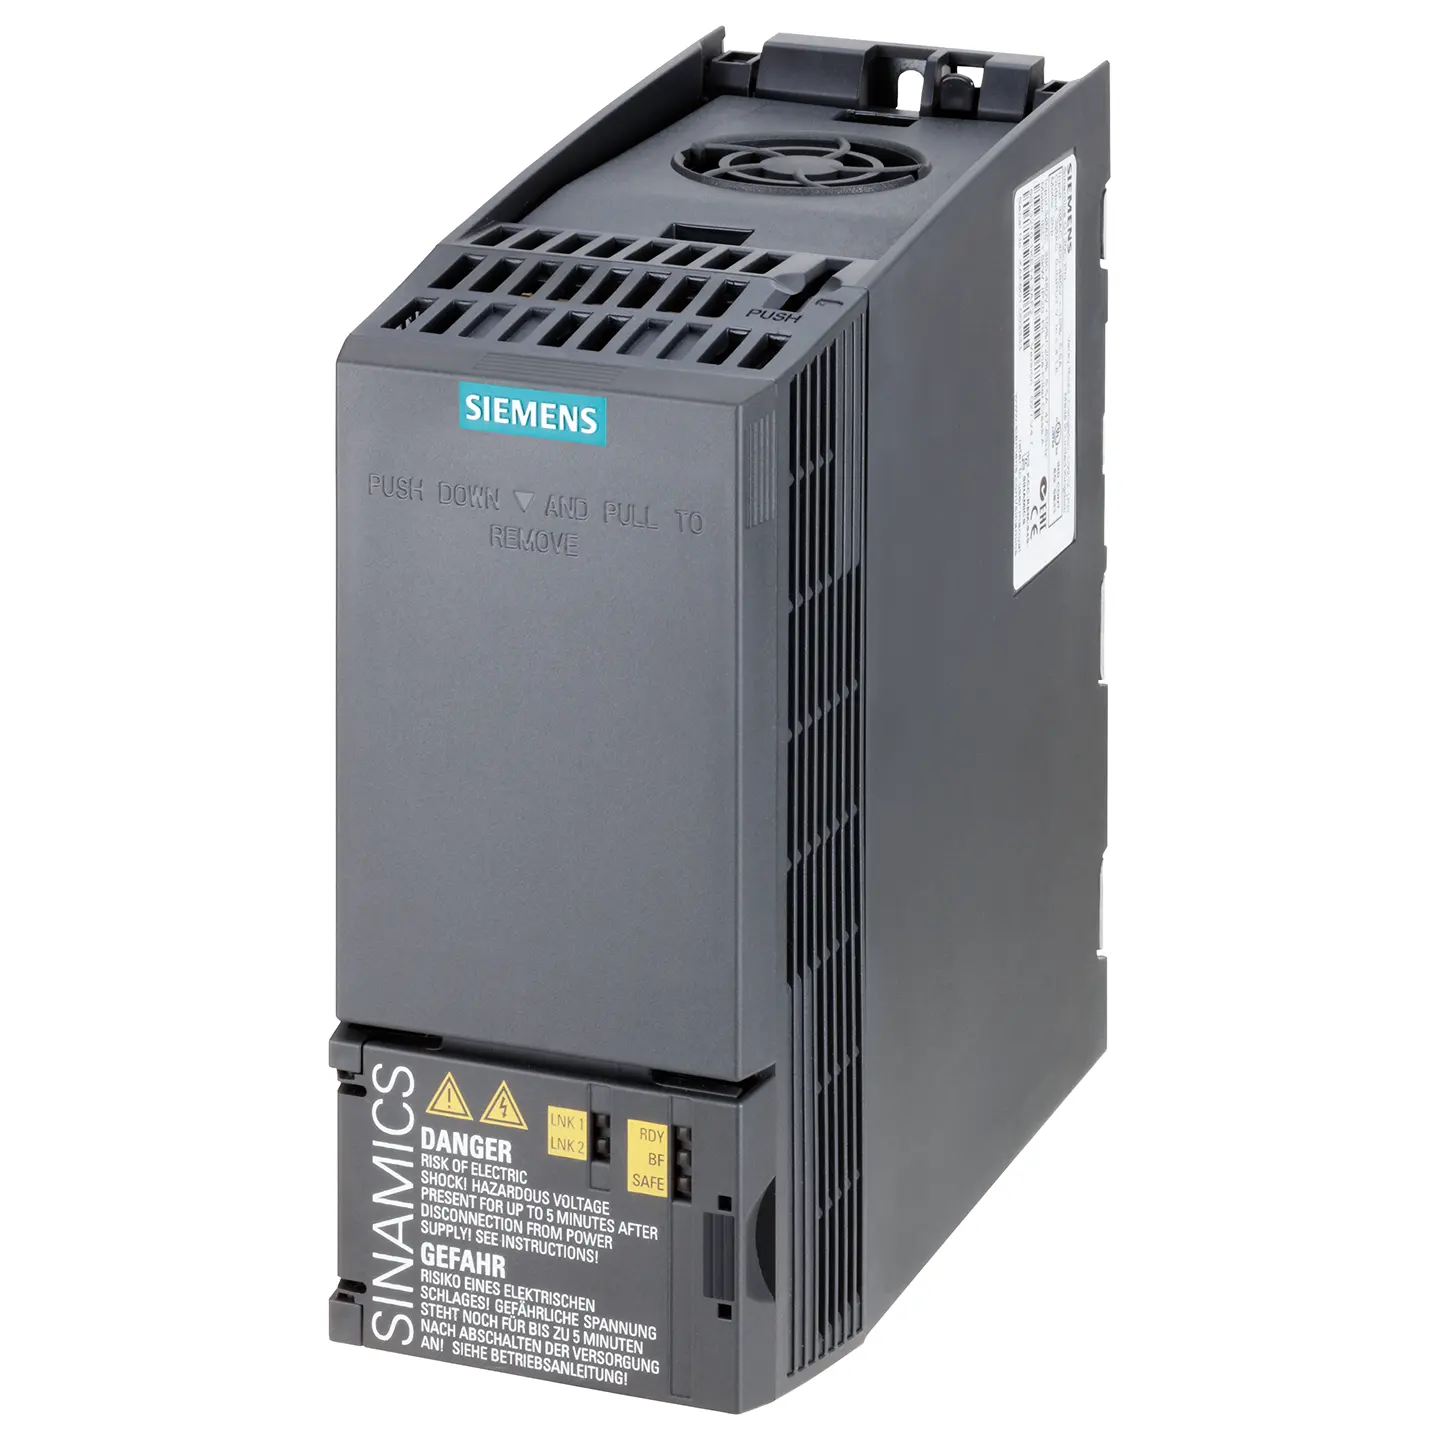 6SL3210-1KE15-8UF2 SINAMICS G120C RATED POWER 2,2KW WITH 150% OVERLOAD FOR 3 SEC New Original In Stock